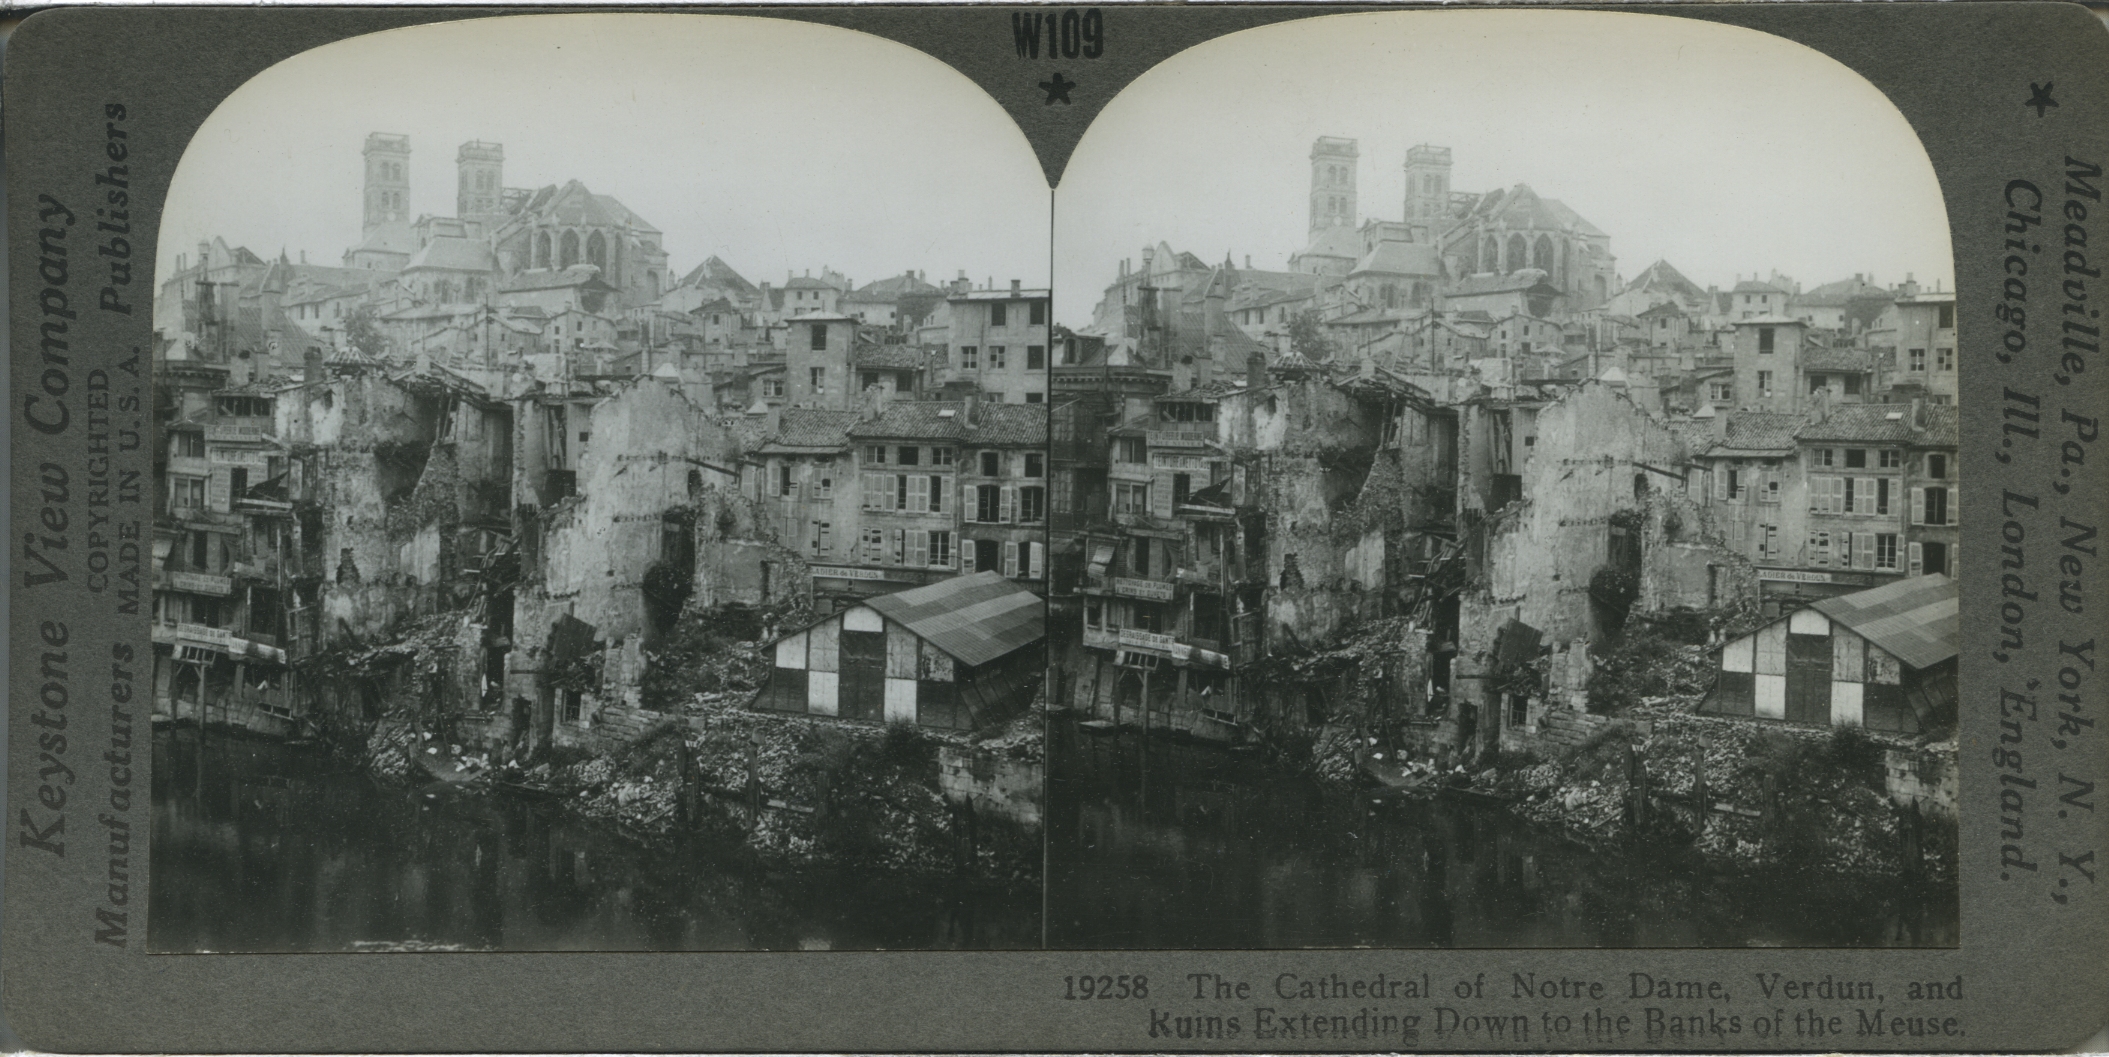 The Cathedral of Notre Dame, Verdun, and Ruins Extending Down to the Banks of the Meuse